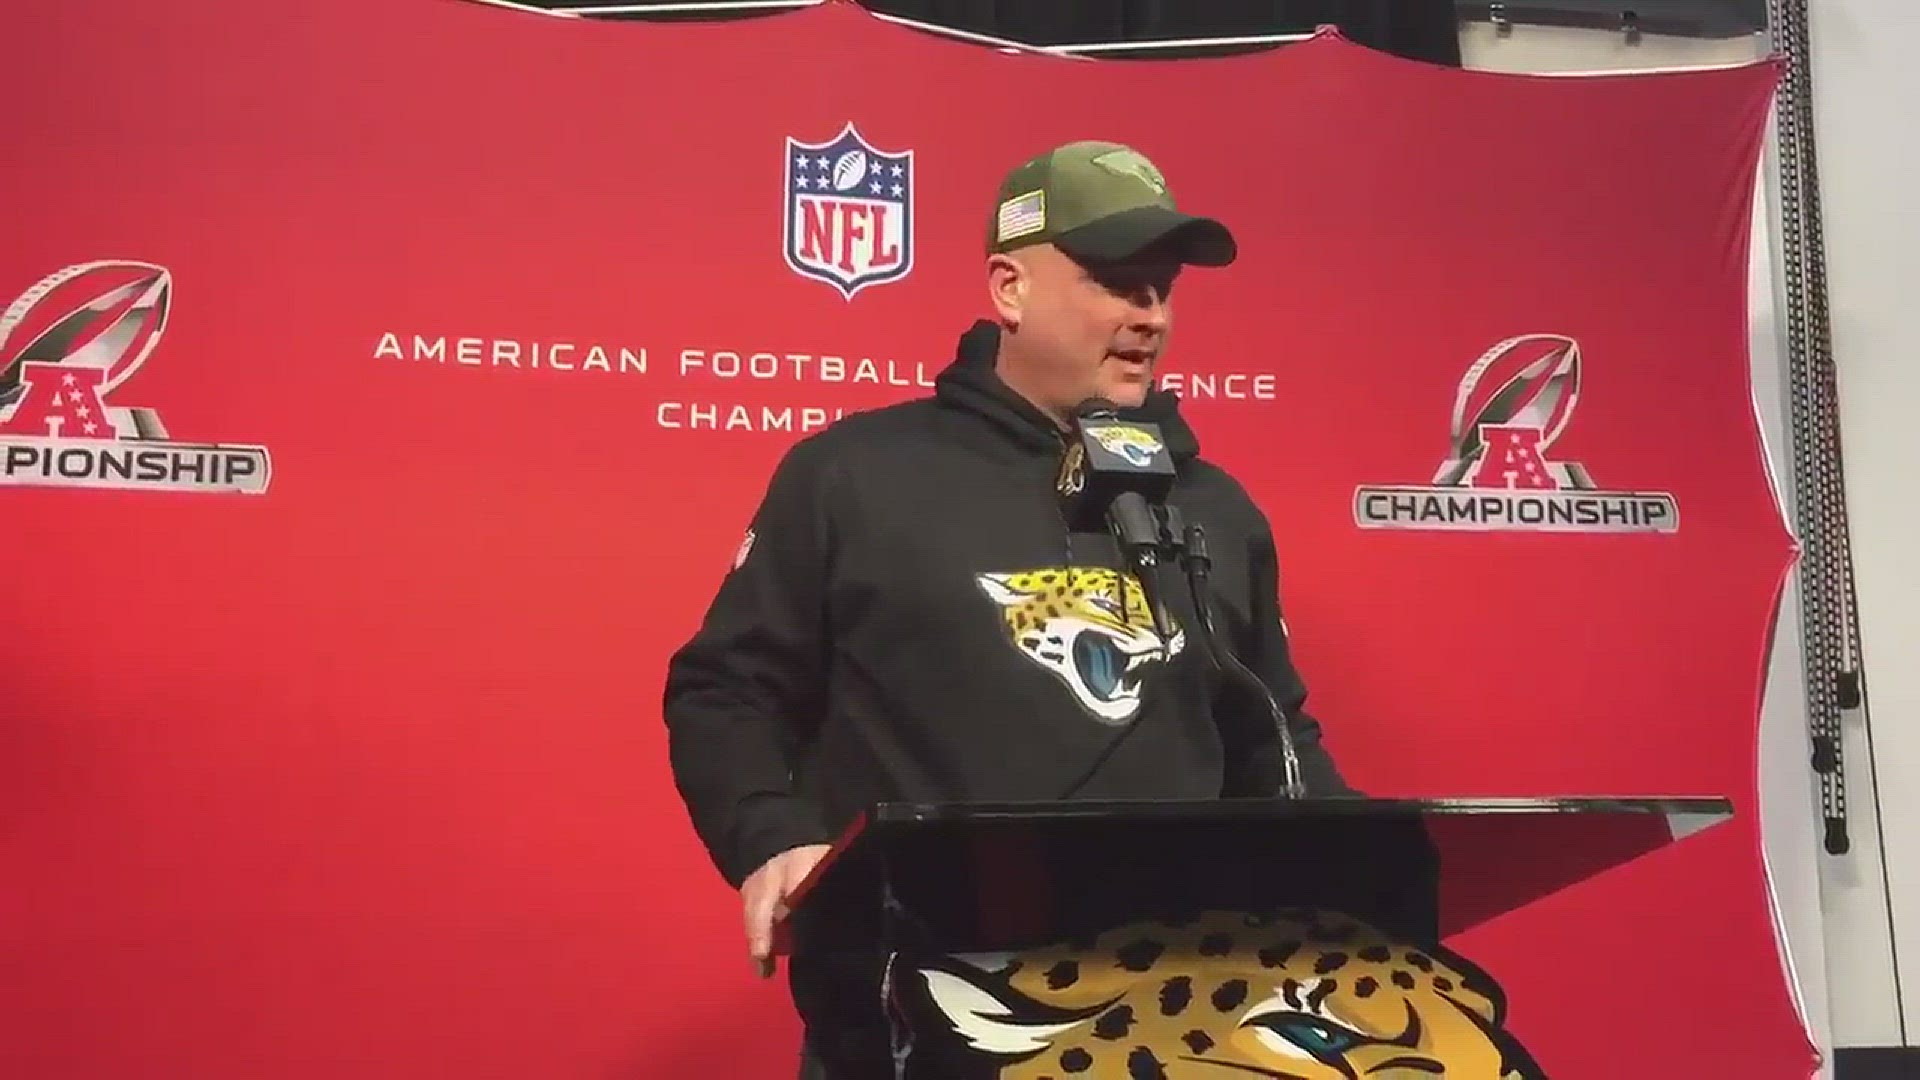 Jaguars offensive coordinator Nathaniel Hackett wants to spread the ball around